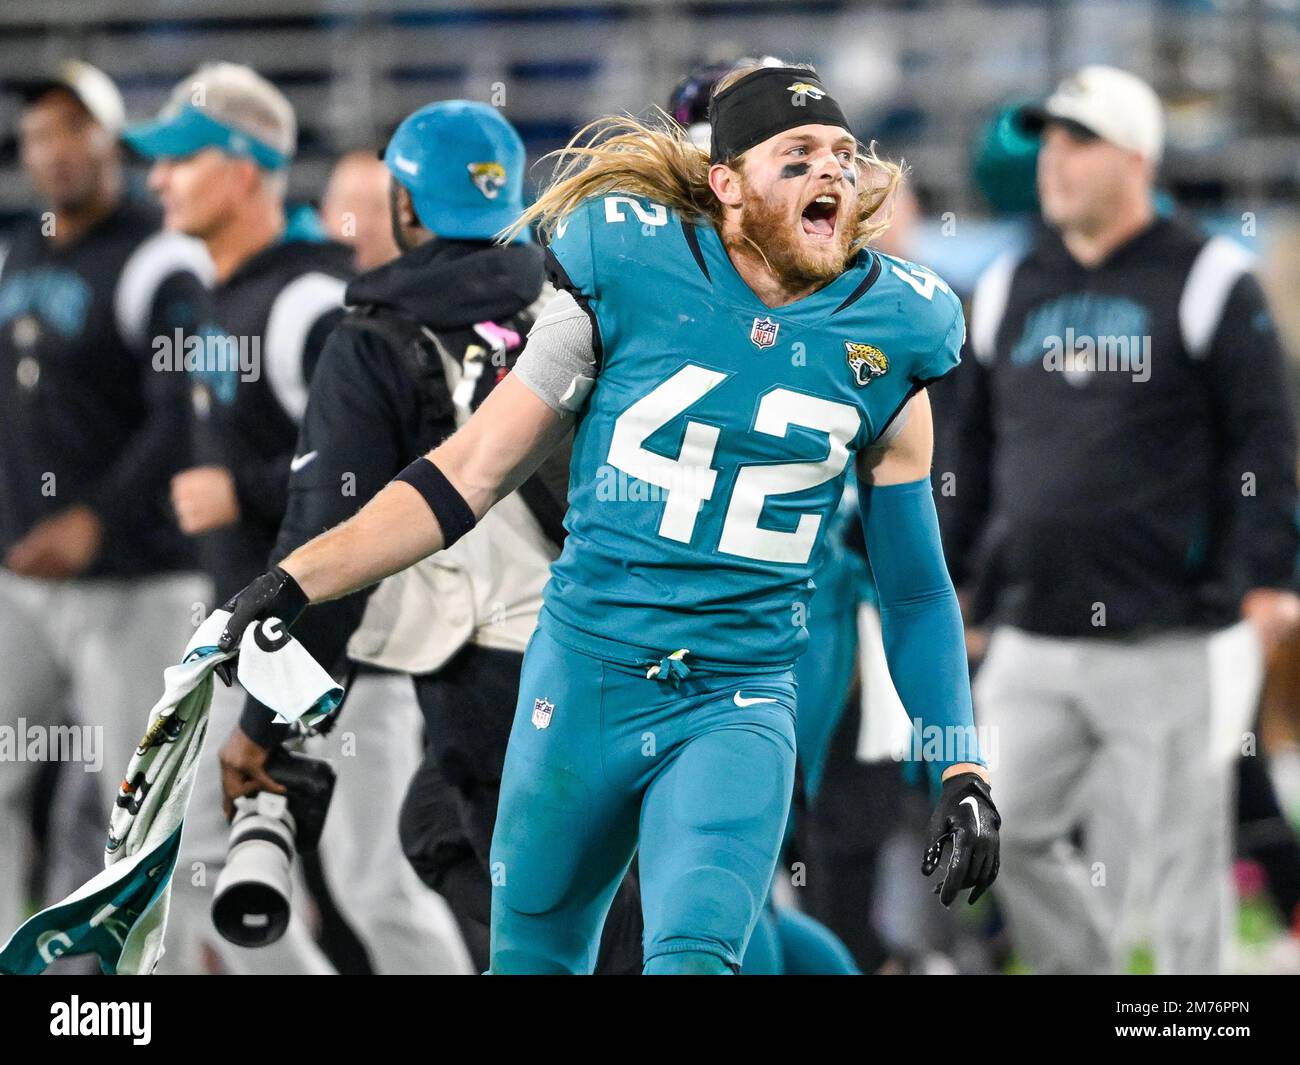 Jacksonville, FL, USA. 7th Jan, 2023. Jacksonville Jaguars safety Andrew Wingard (42) reacts after the Jacksonville Jaguars defeated the Tennessee Titans 20-16 to win the AFC South Division in Jacksonville, FL. Romeo T Guzman/CSM/Alamy Live News Stock Photo